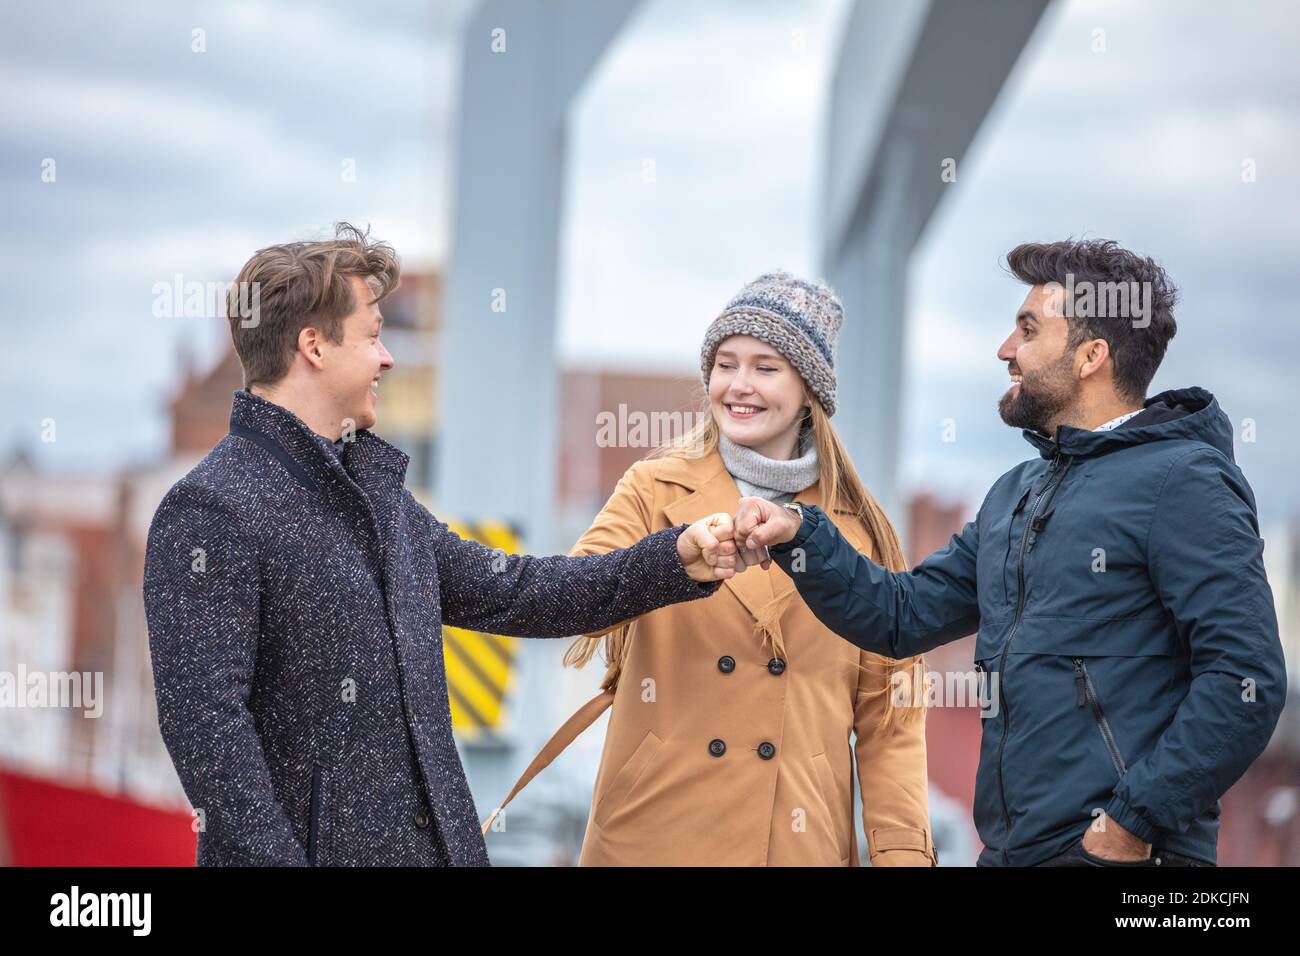 Two men and a woman greeting at Corona time, without everyday masks, out and about in the city in the cold season, Stock Photo